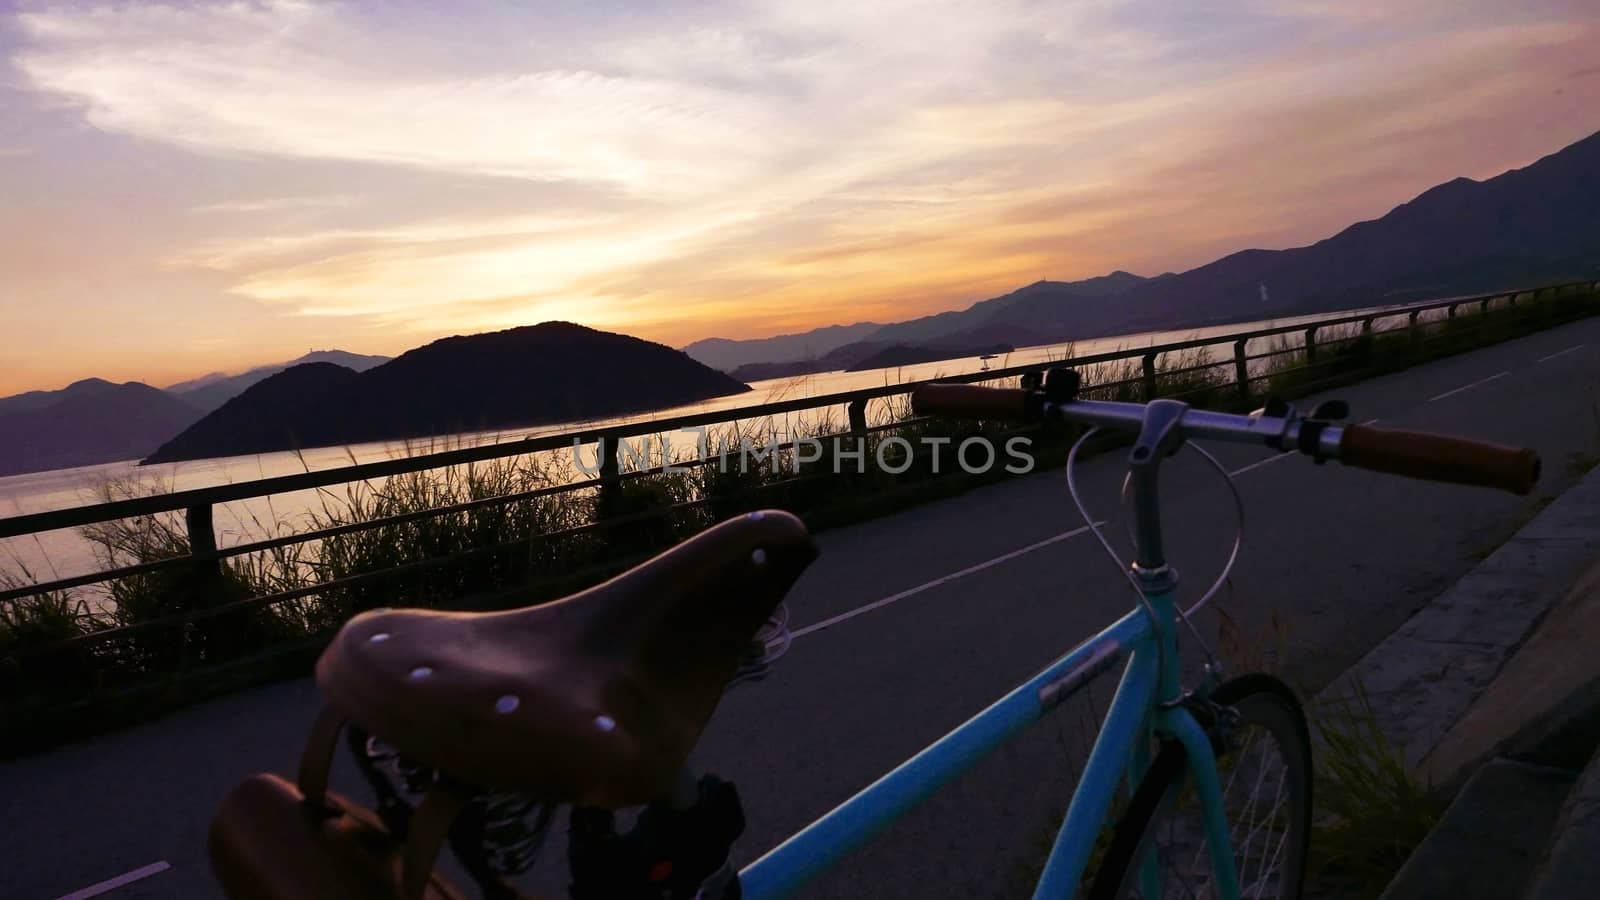 The part of retro bicycle and the frame silhouette at the sunset